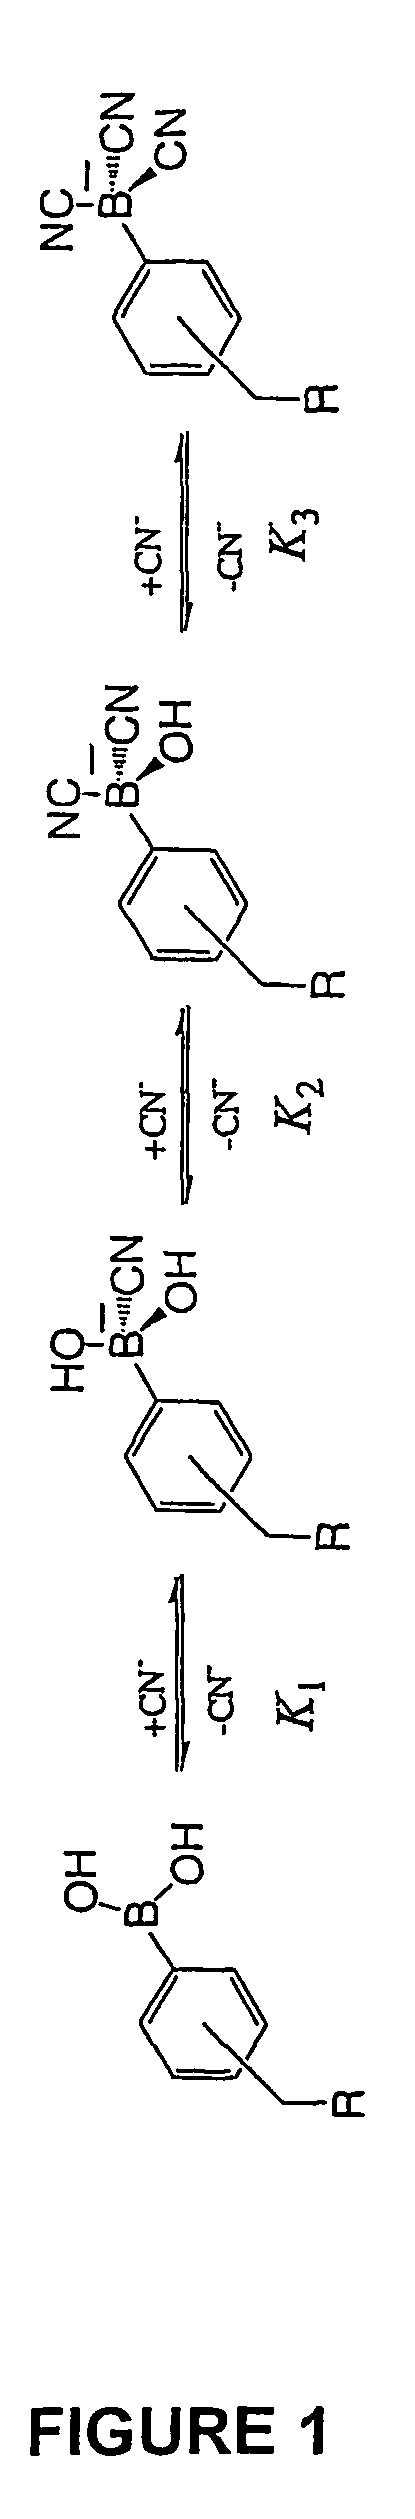 Cyanide sensing compounds and uses thereof